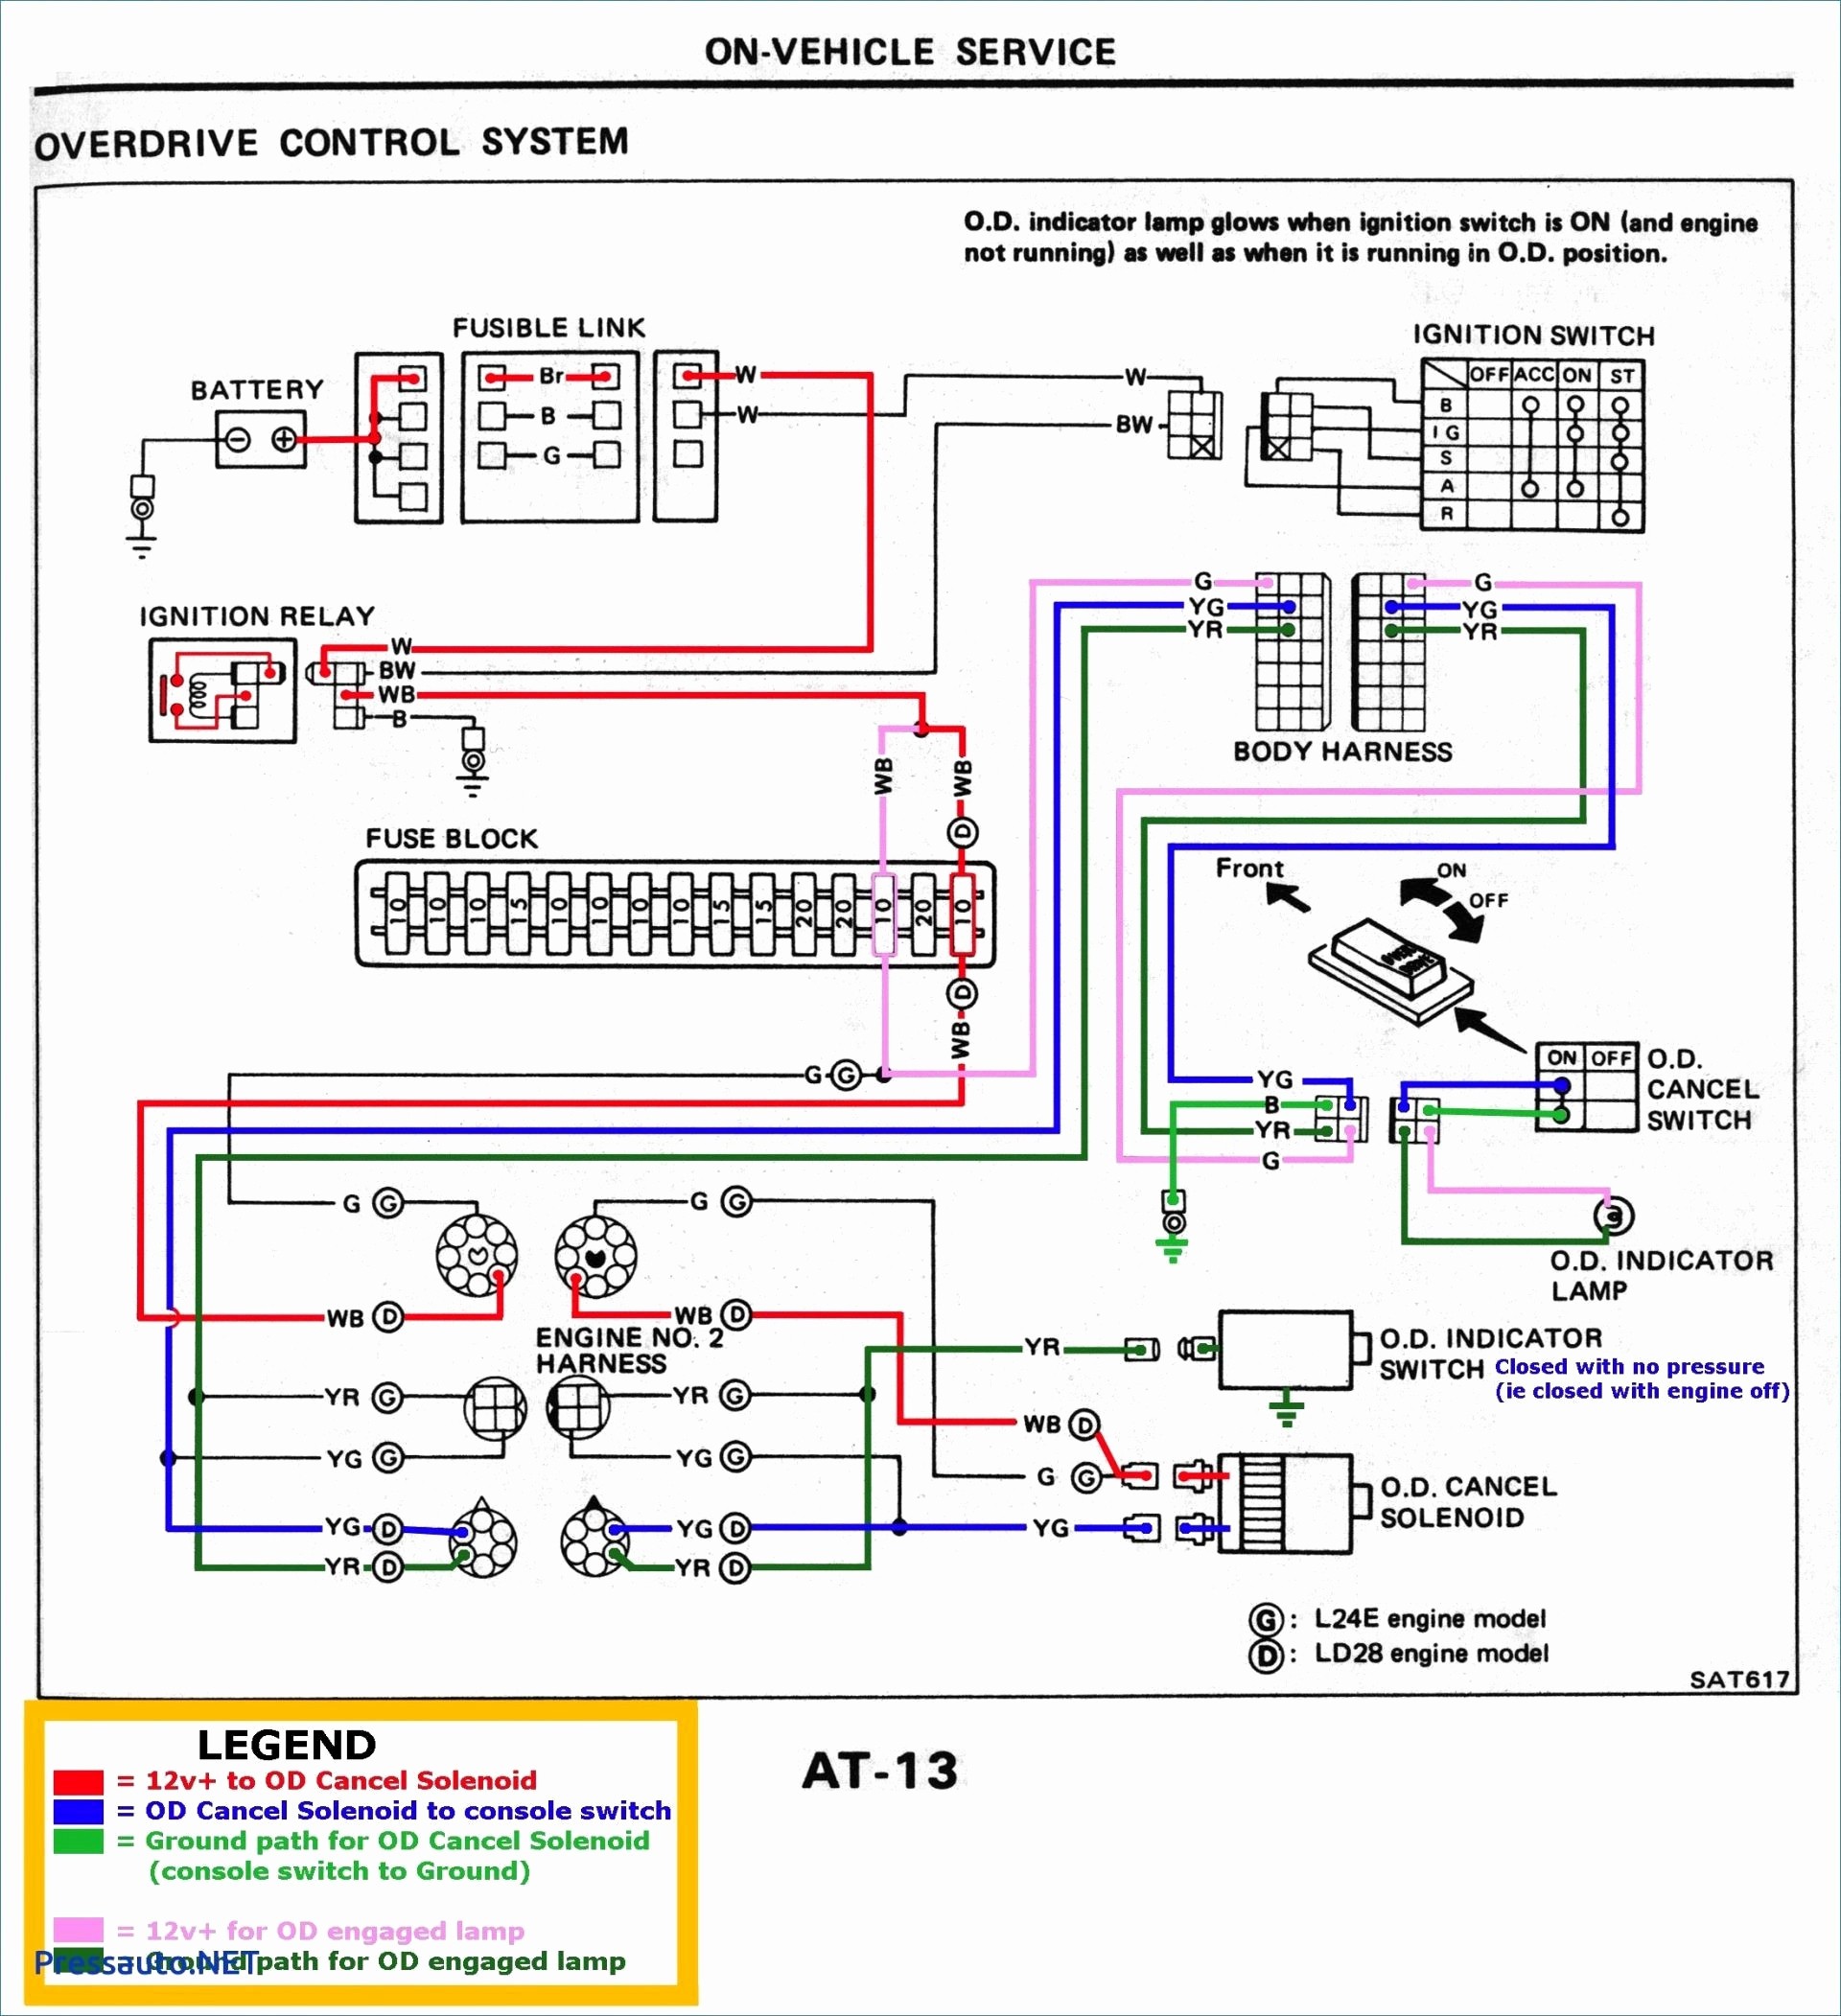 7 Way Trailer Wire Diagram Wiring Diagram for A 7 Way Trailer Plug Inspirational Chevy 7 Pin Of 7 Way Trailer Wire Diagram